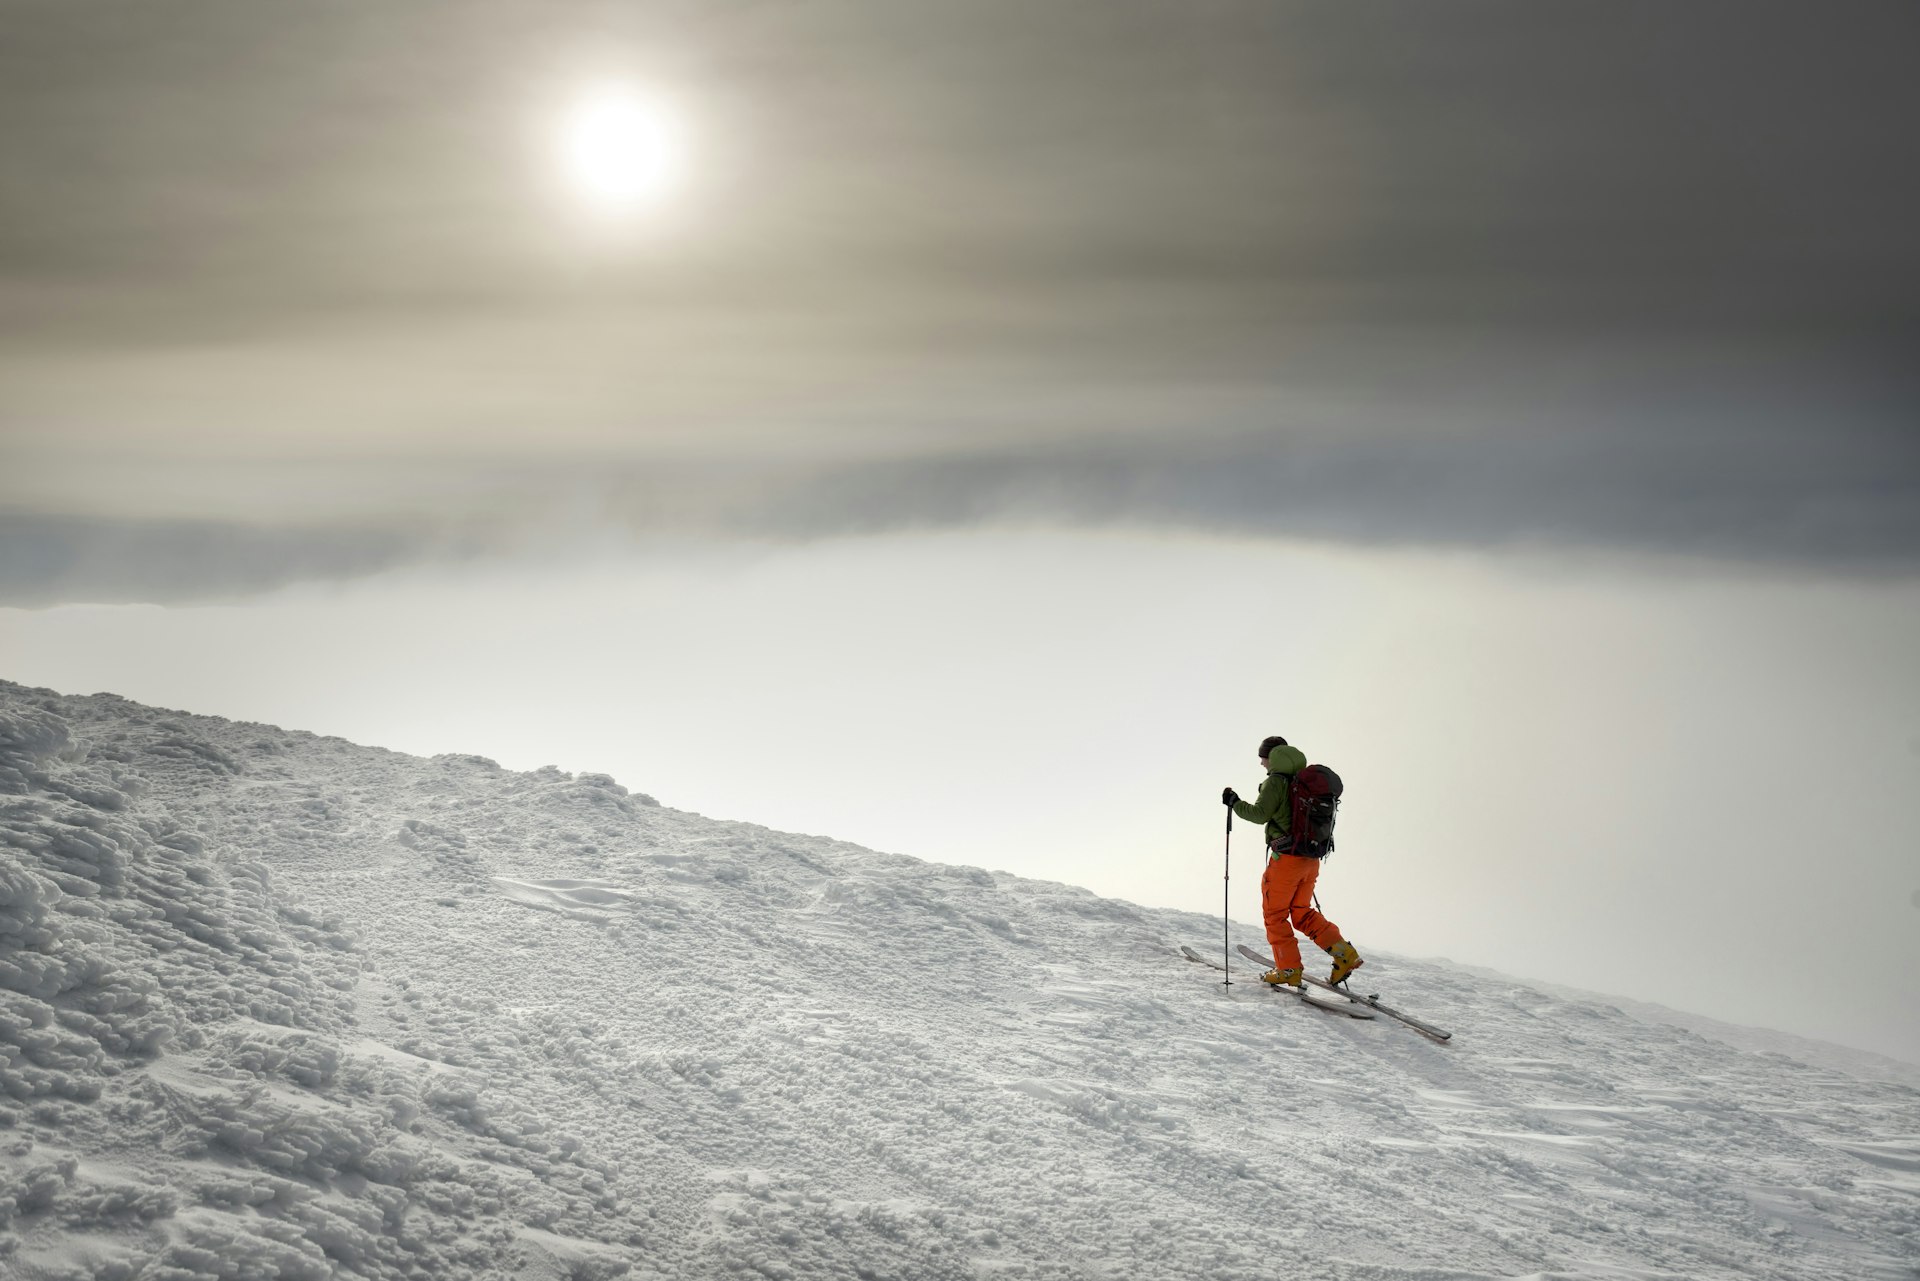 A skier touring the Cairngorms, Scotland